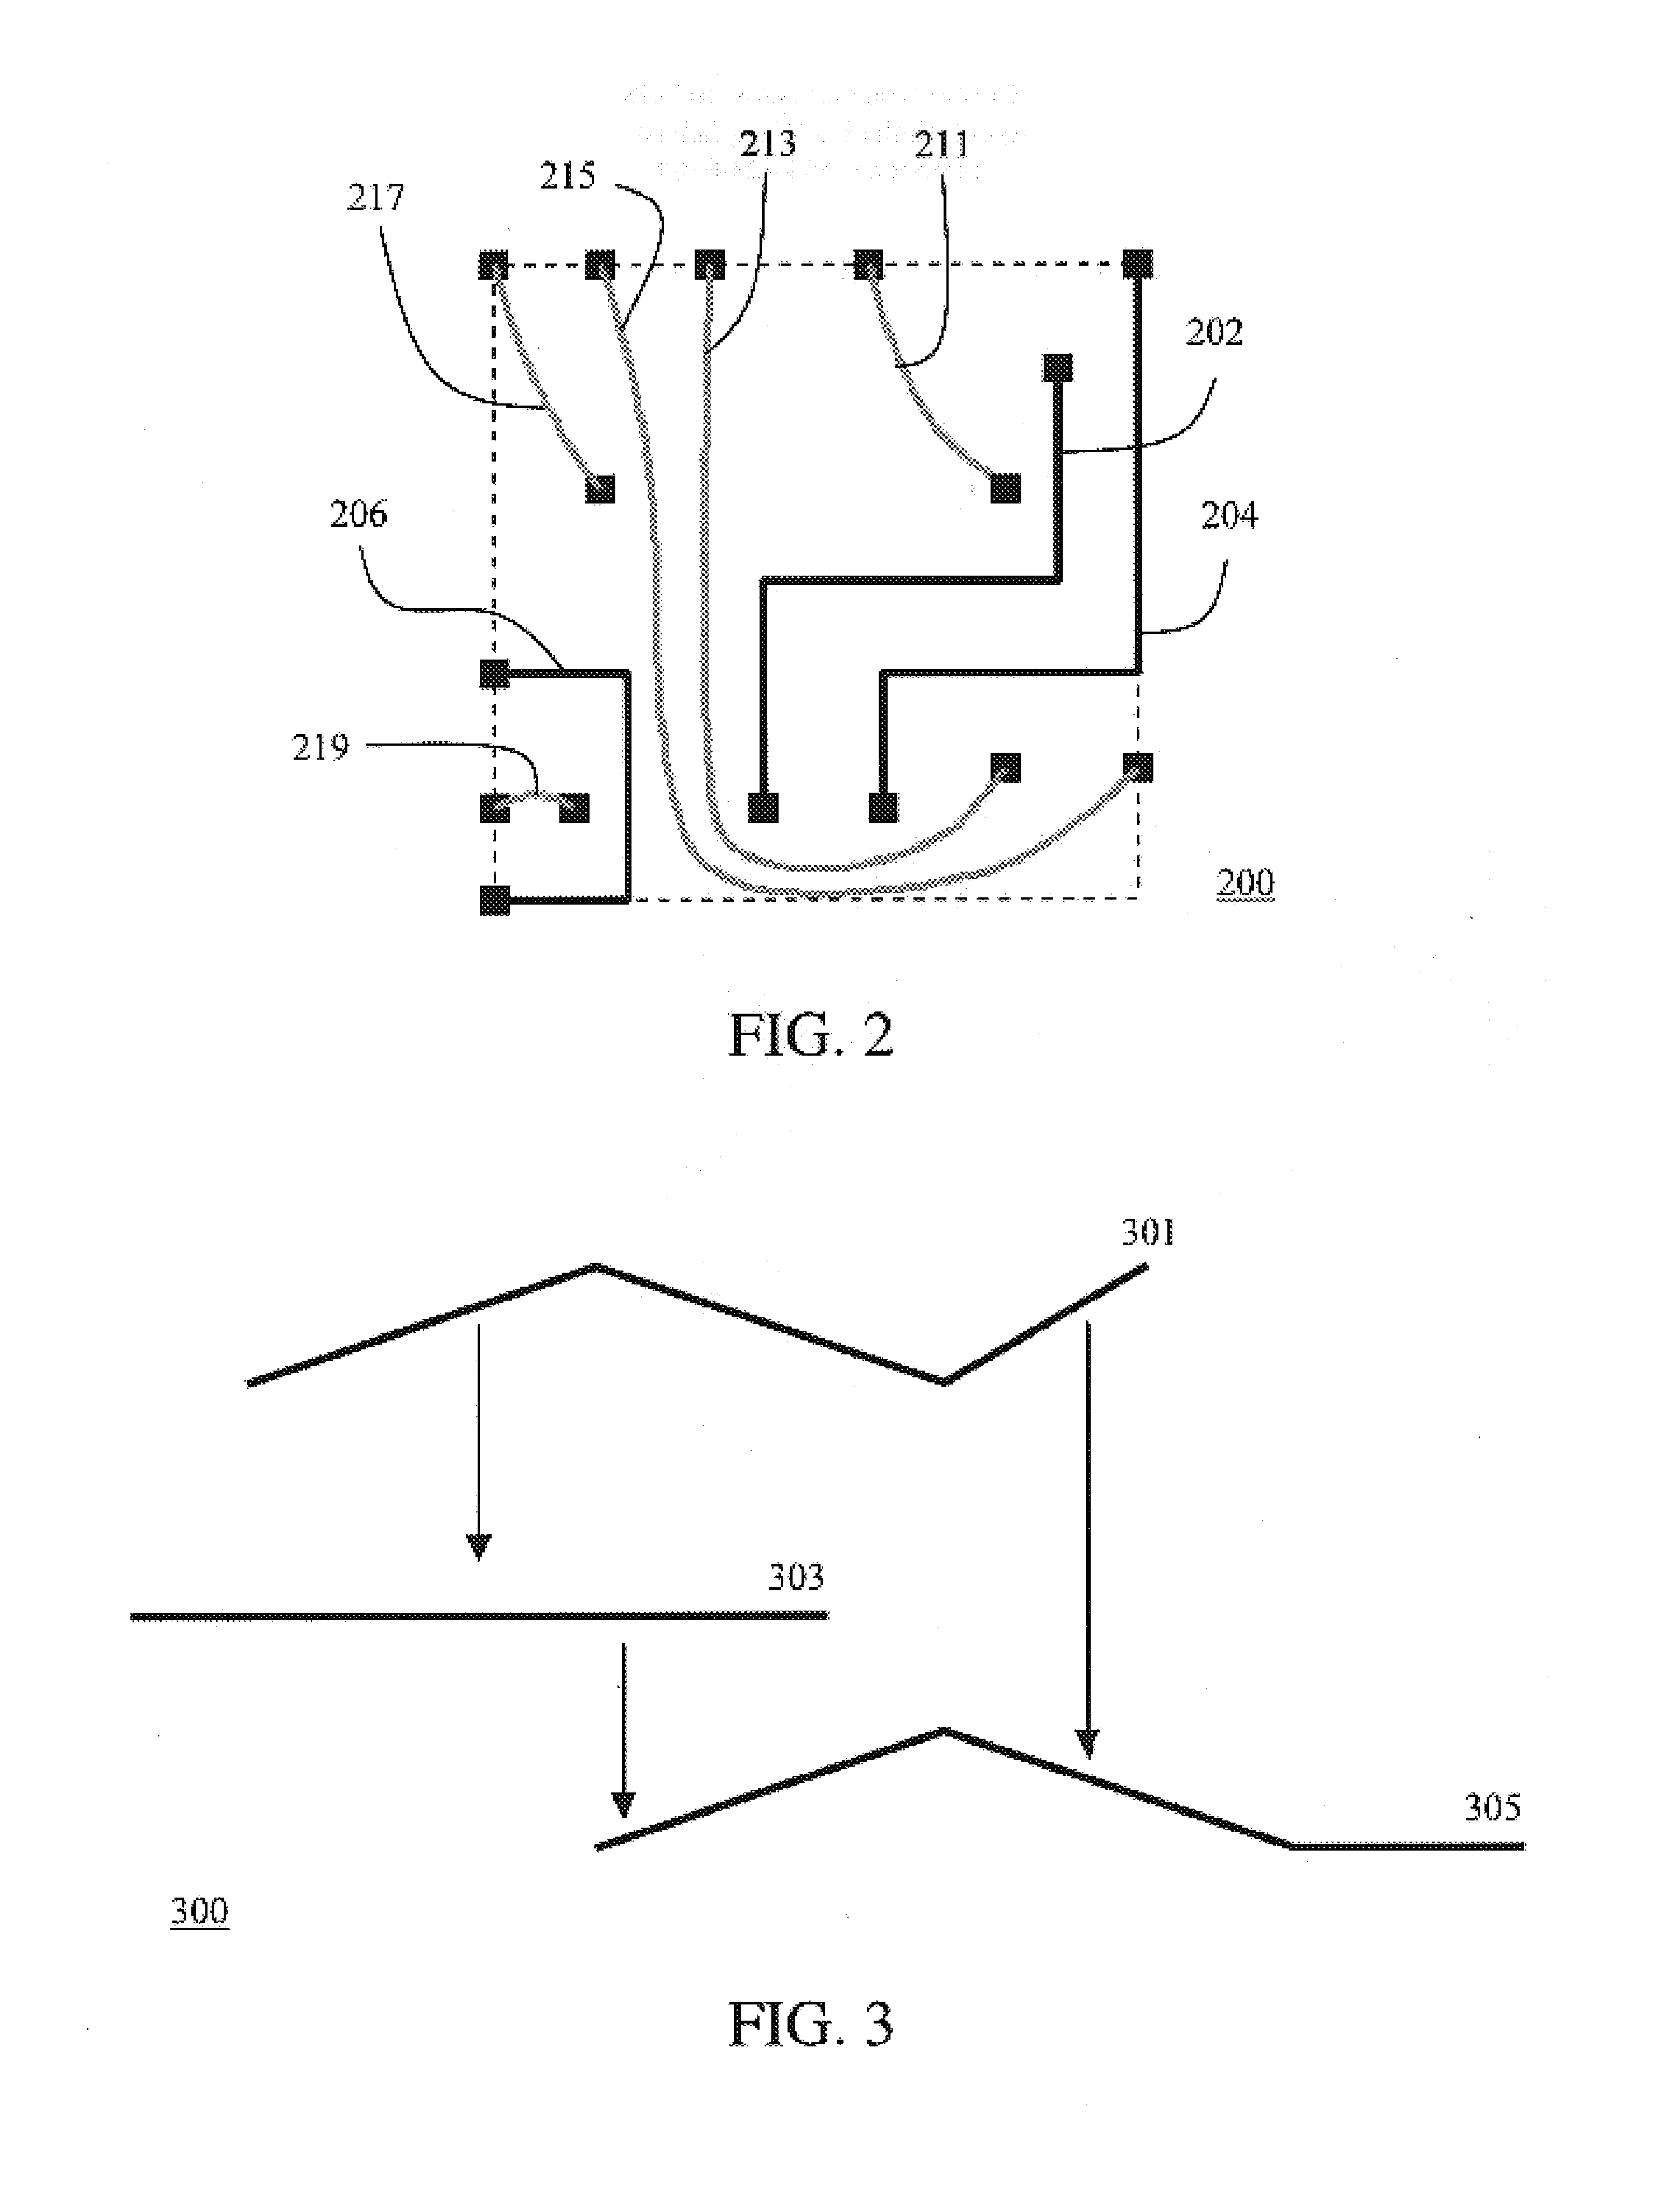 Wire spreading through geotopological layout